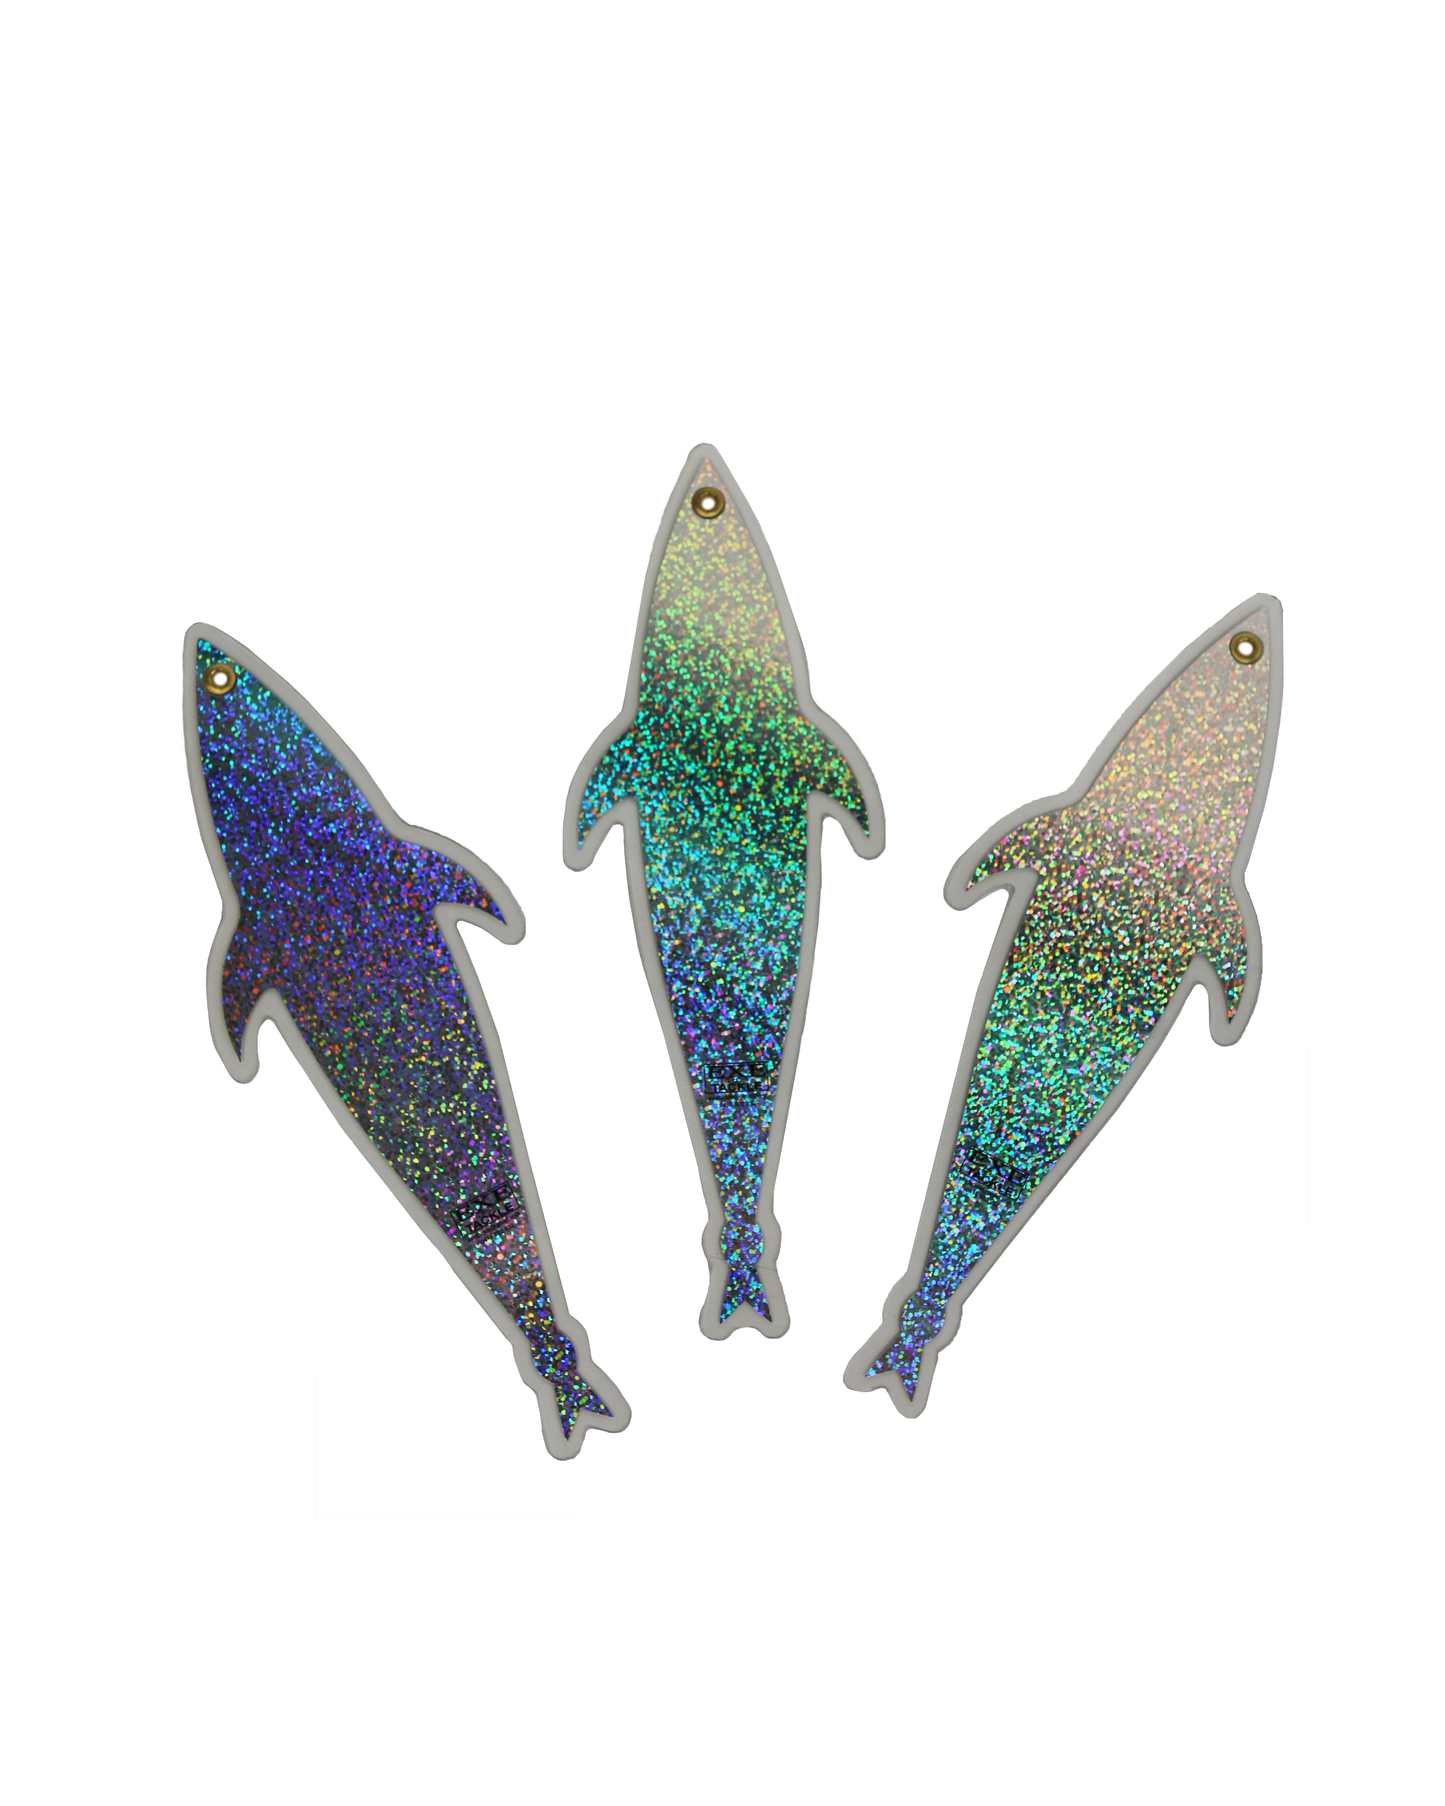 3 x Black or Clear Polycarbonate Holographic Fish